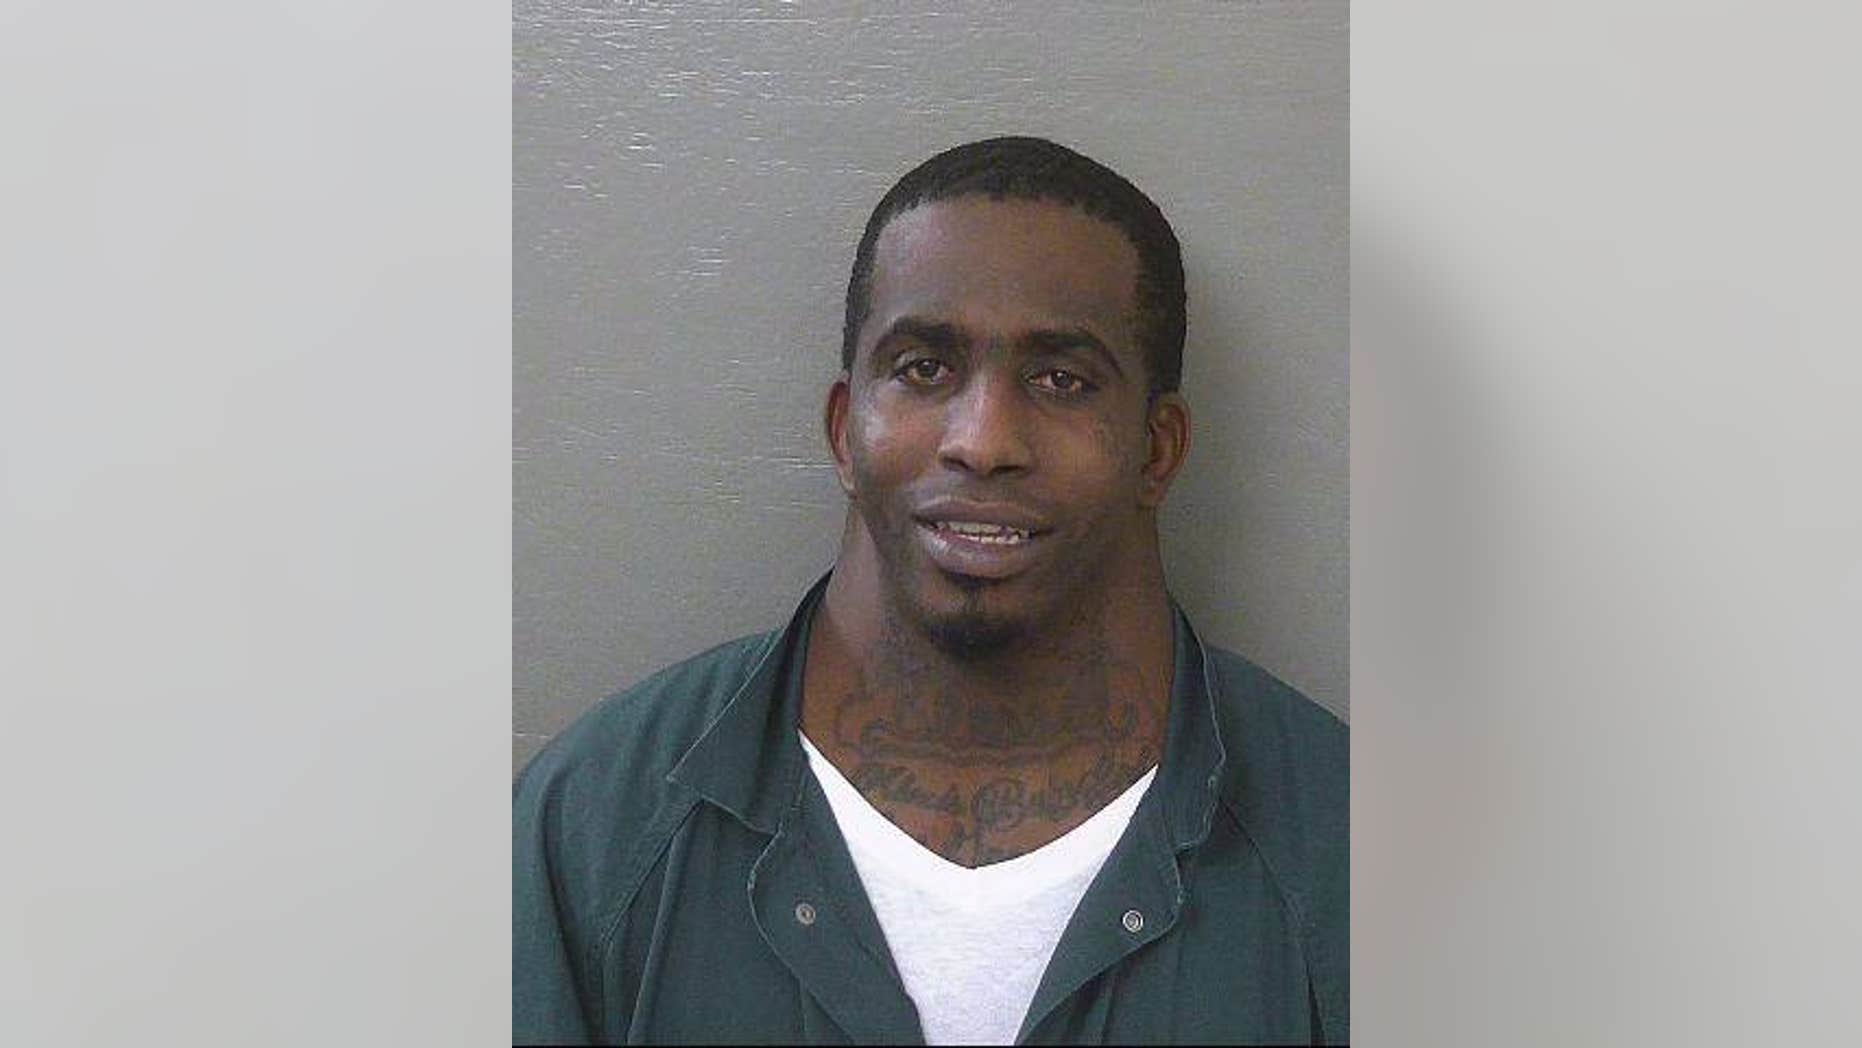 Charles Dion McDowell, 31, was arrested Tuesday, but it's his mugshot that has gone viral.